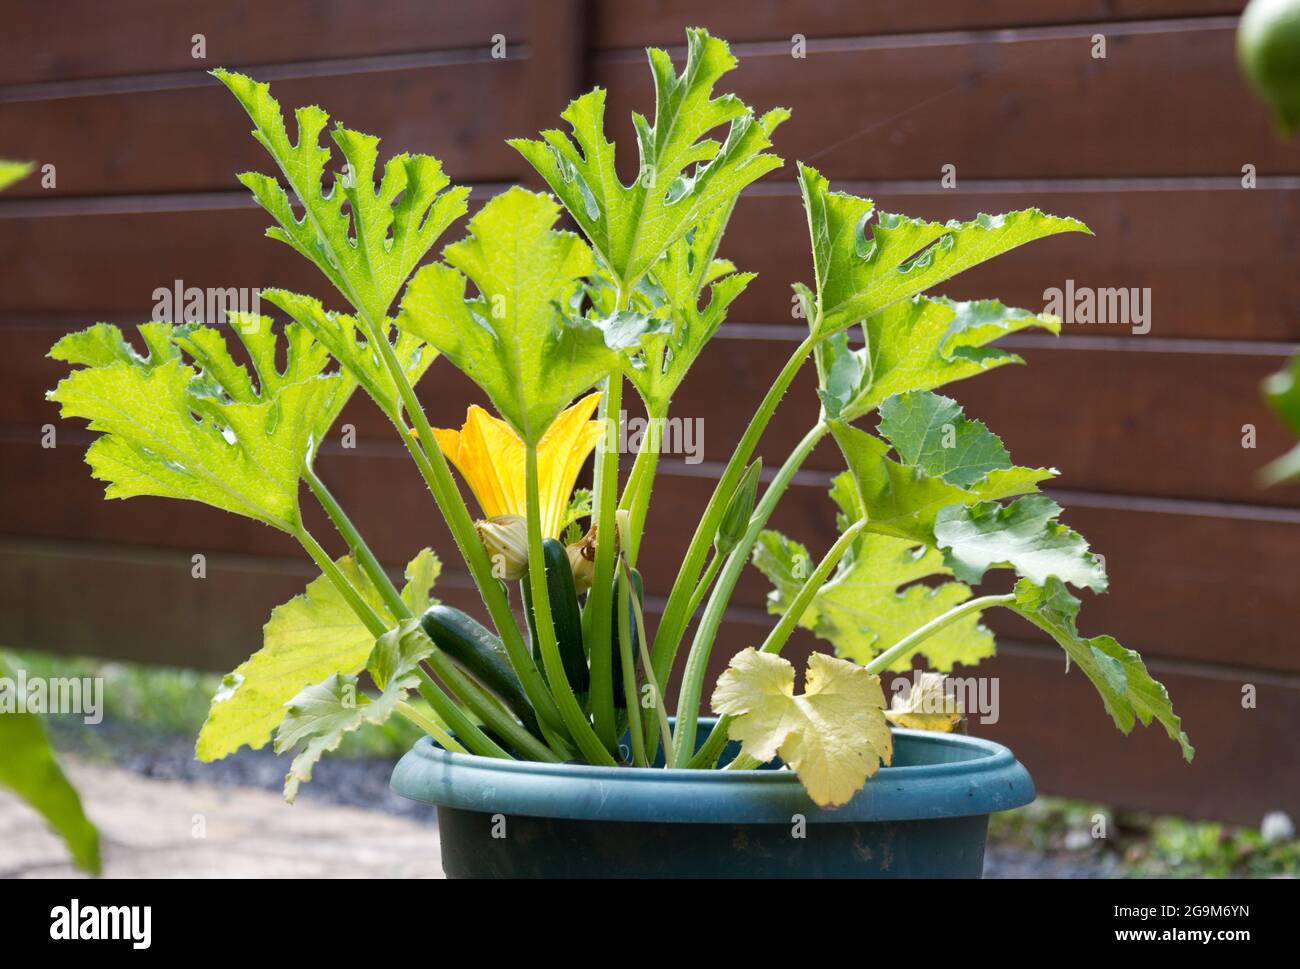 Courgette or zucchini plant with fruit Stock Photo